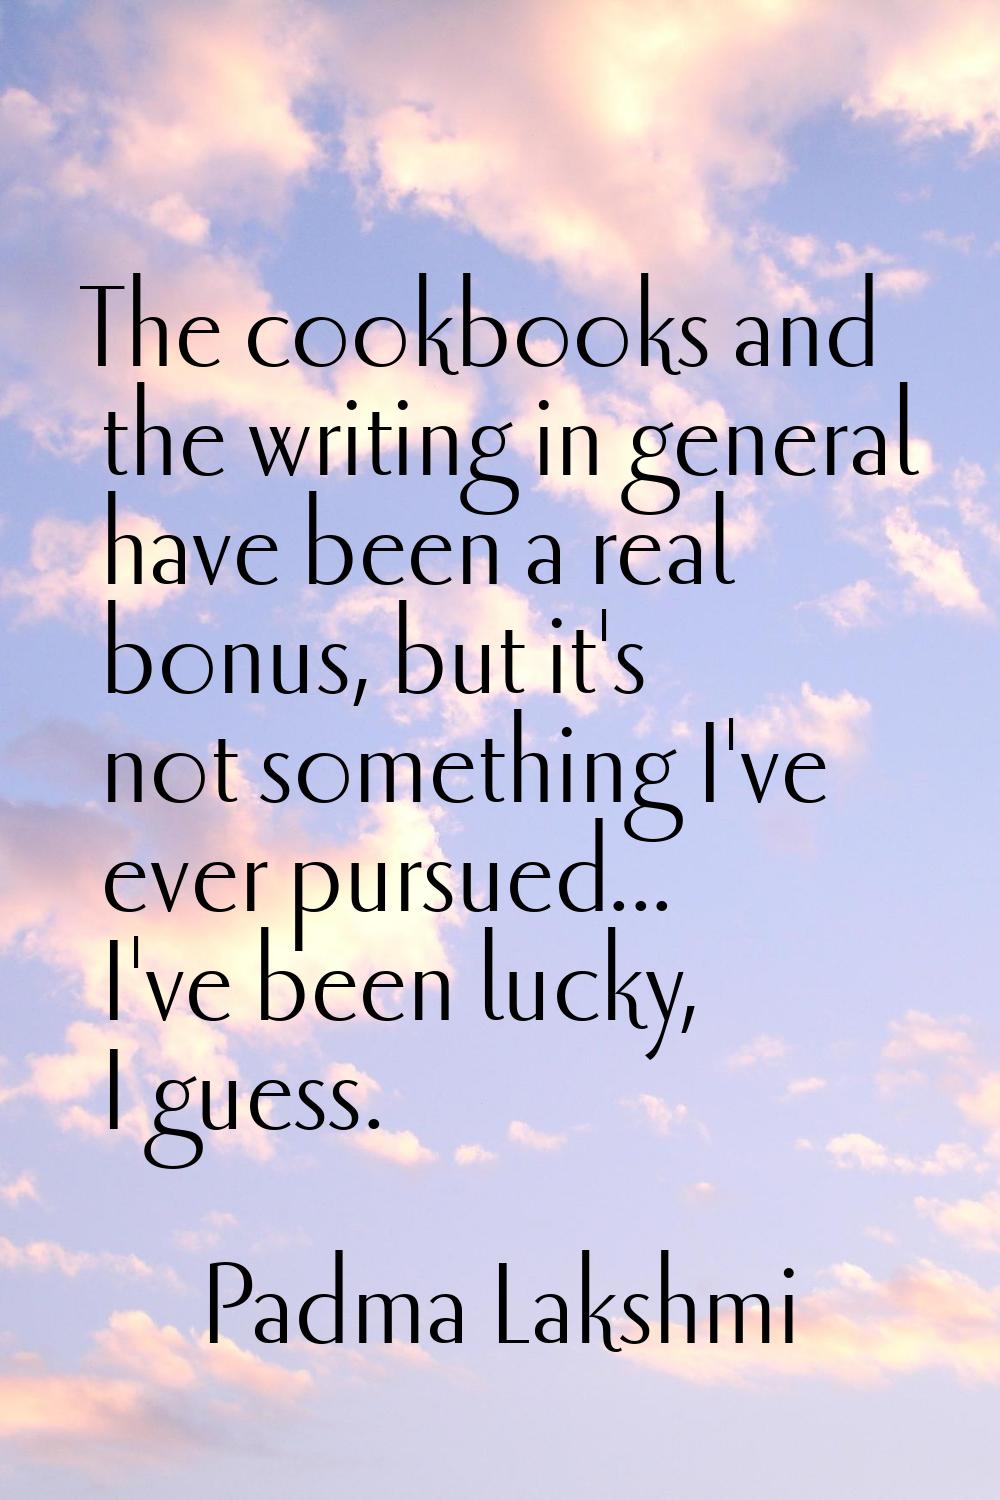 The cookbooks and the writing in general have been a real bonus, but it's not something I've ever p